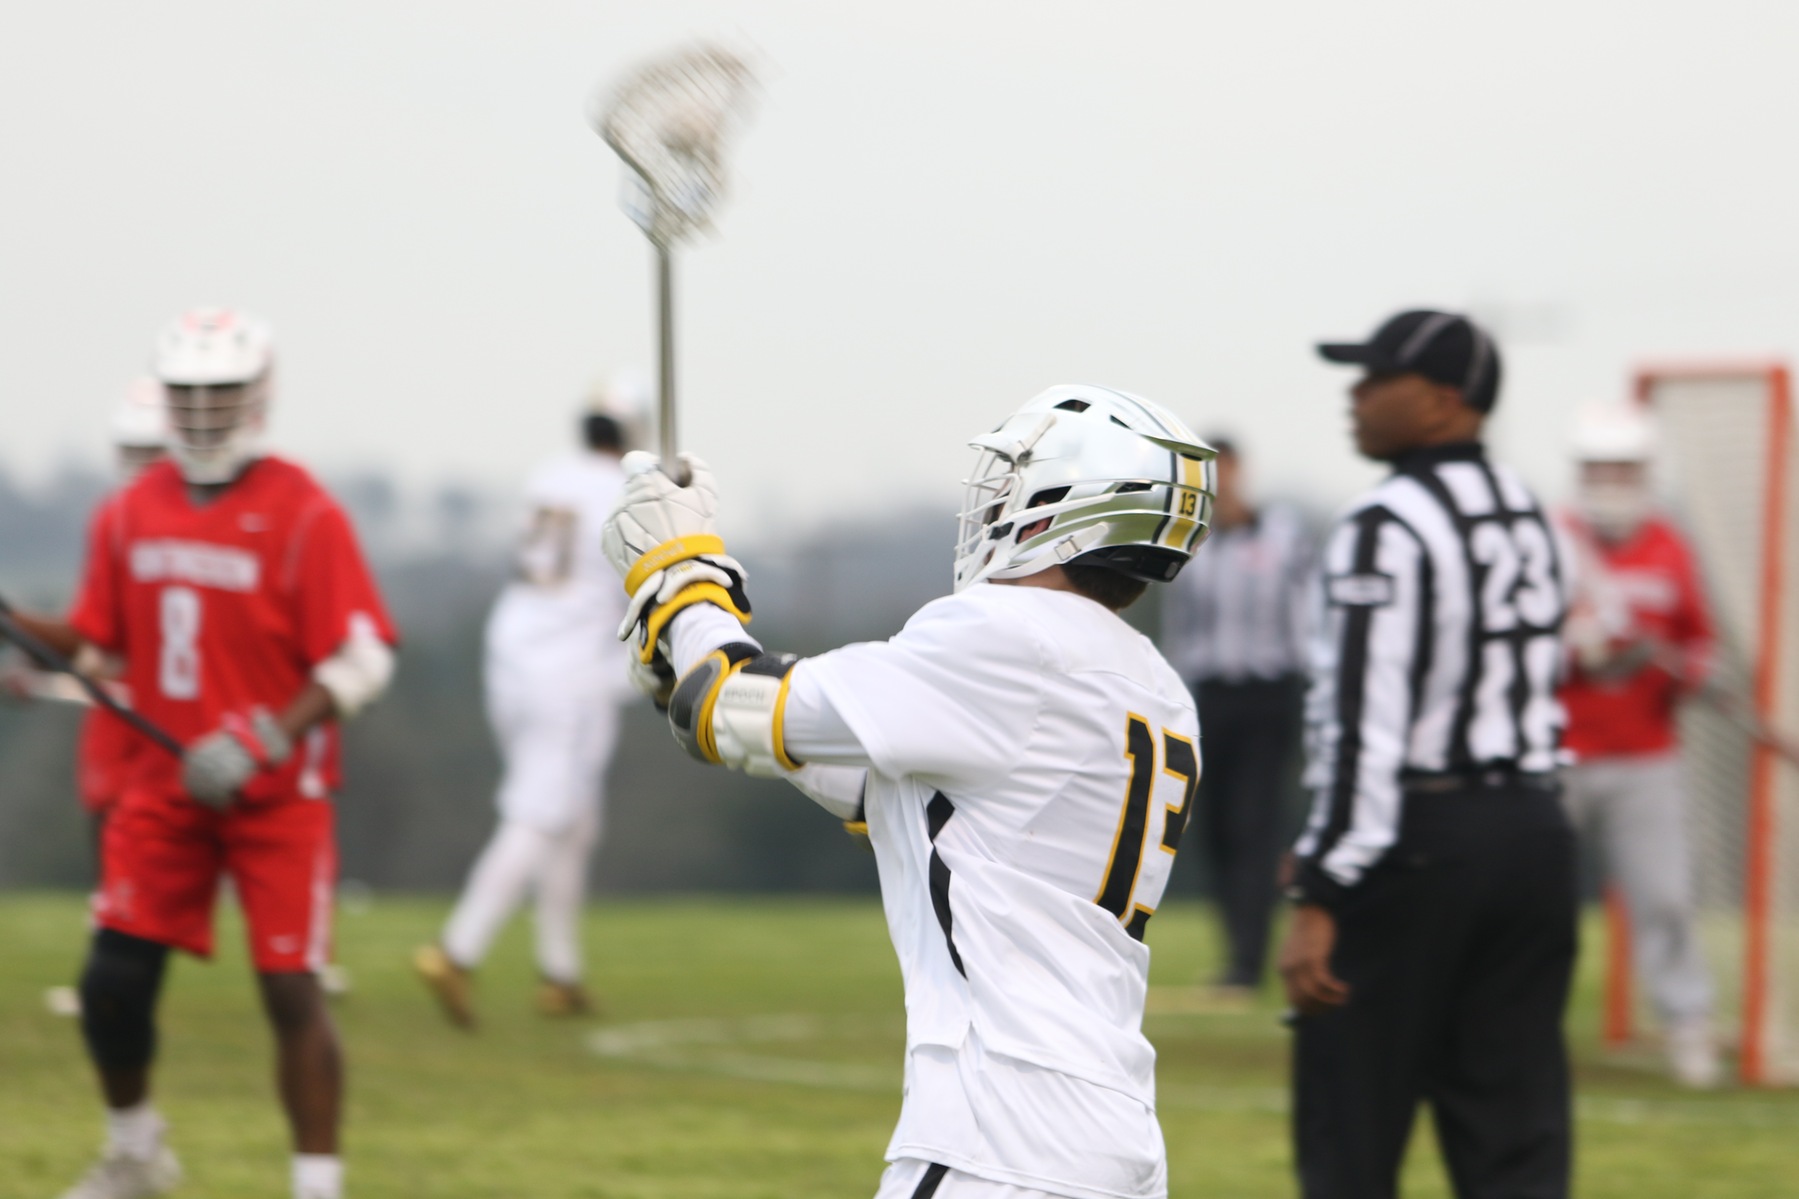 Men's Lacrosse Misses Last-Second Shot to Fall 10-9 to Trine